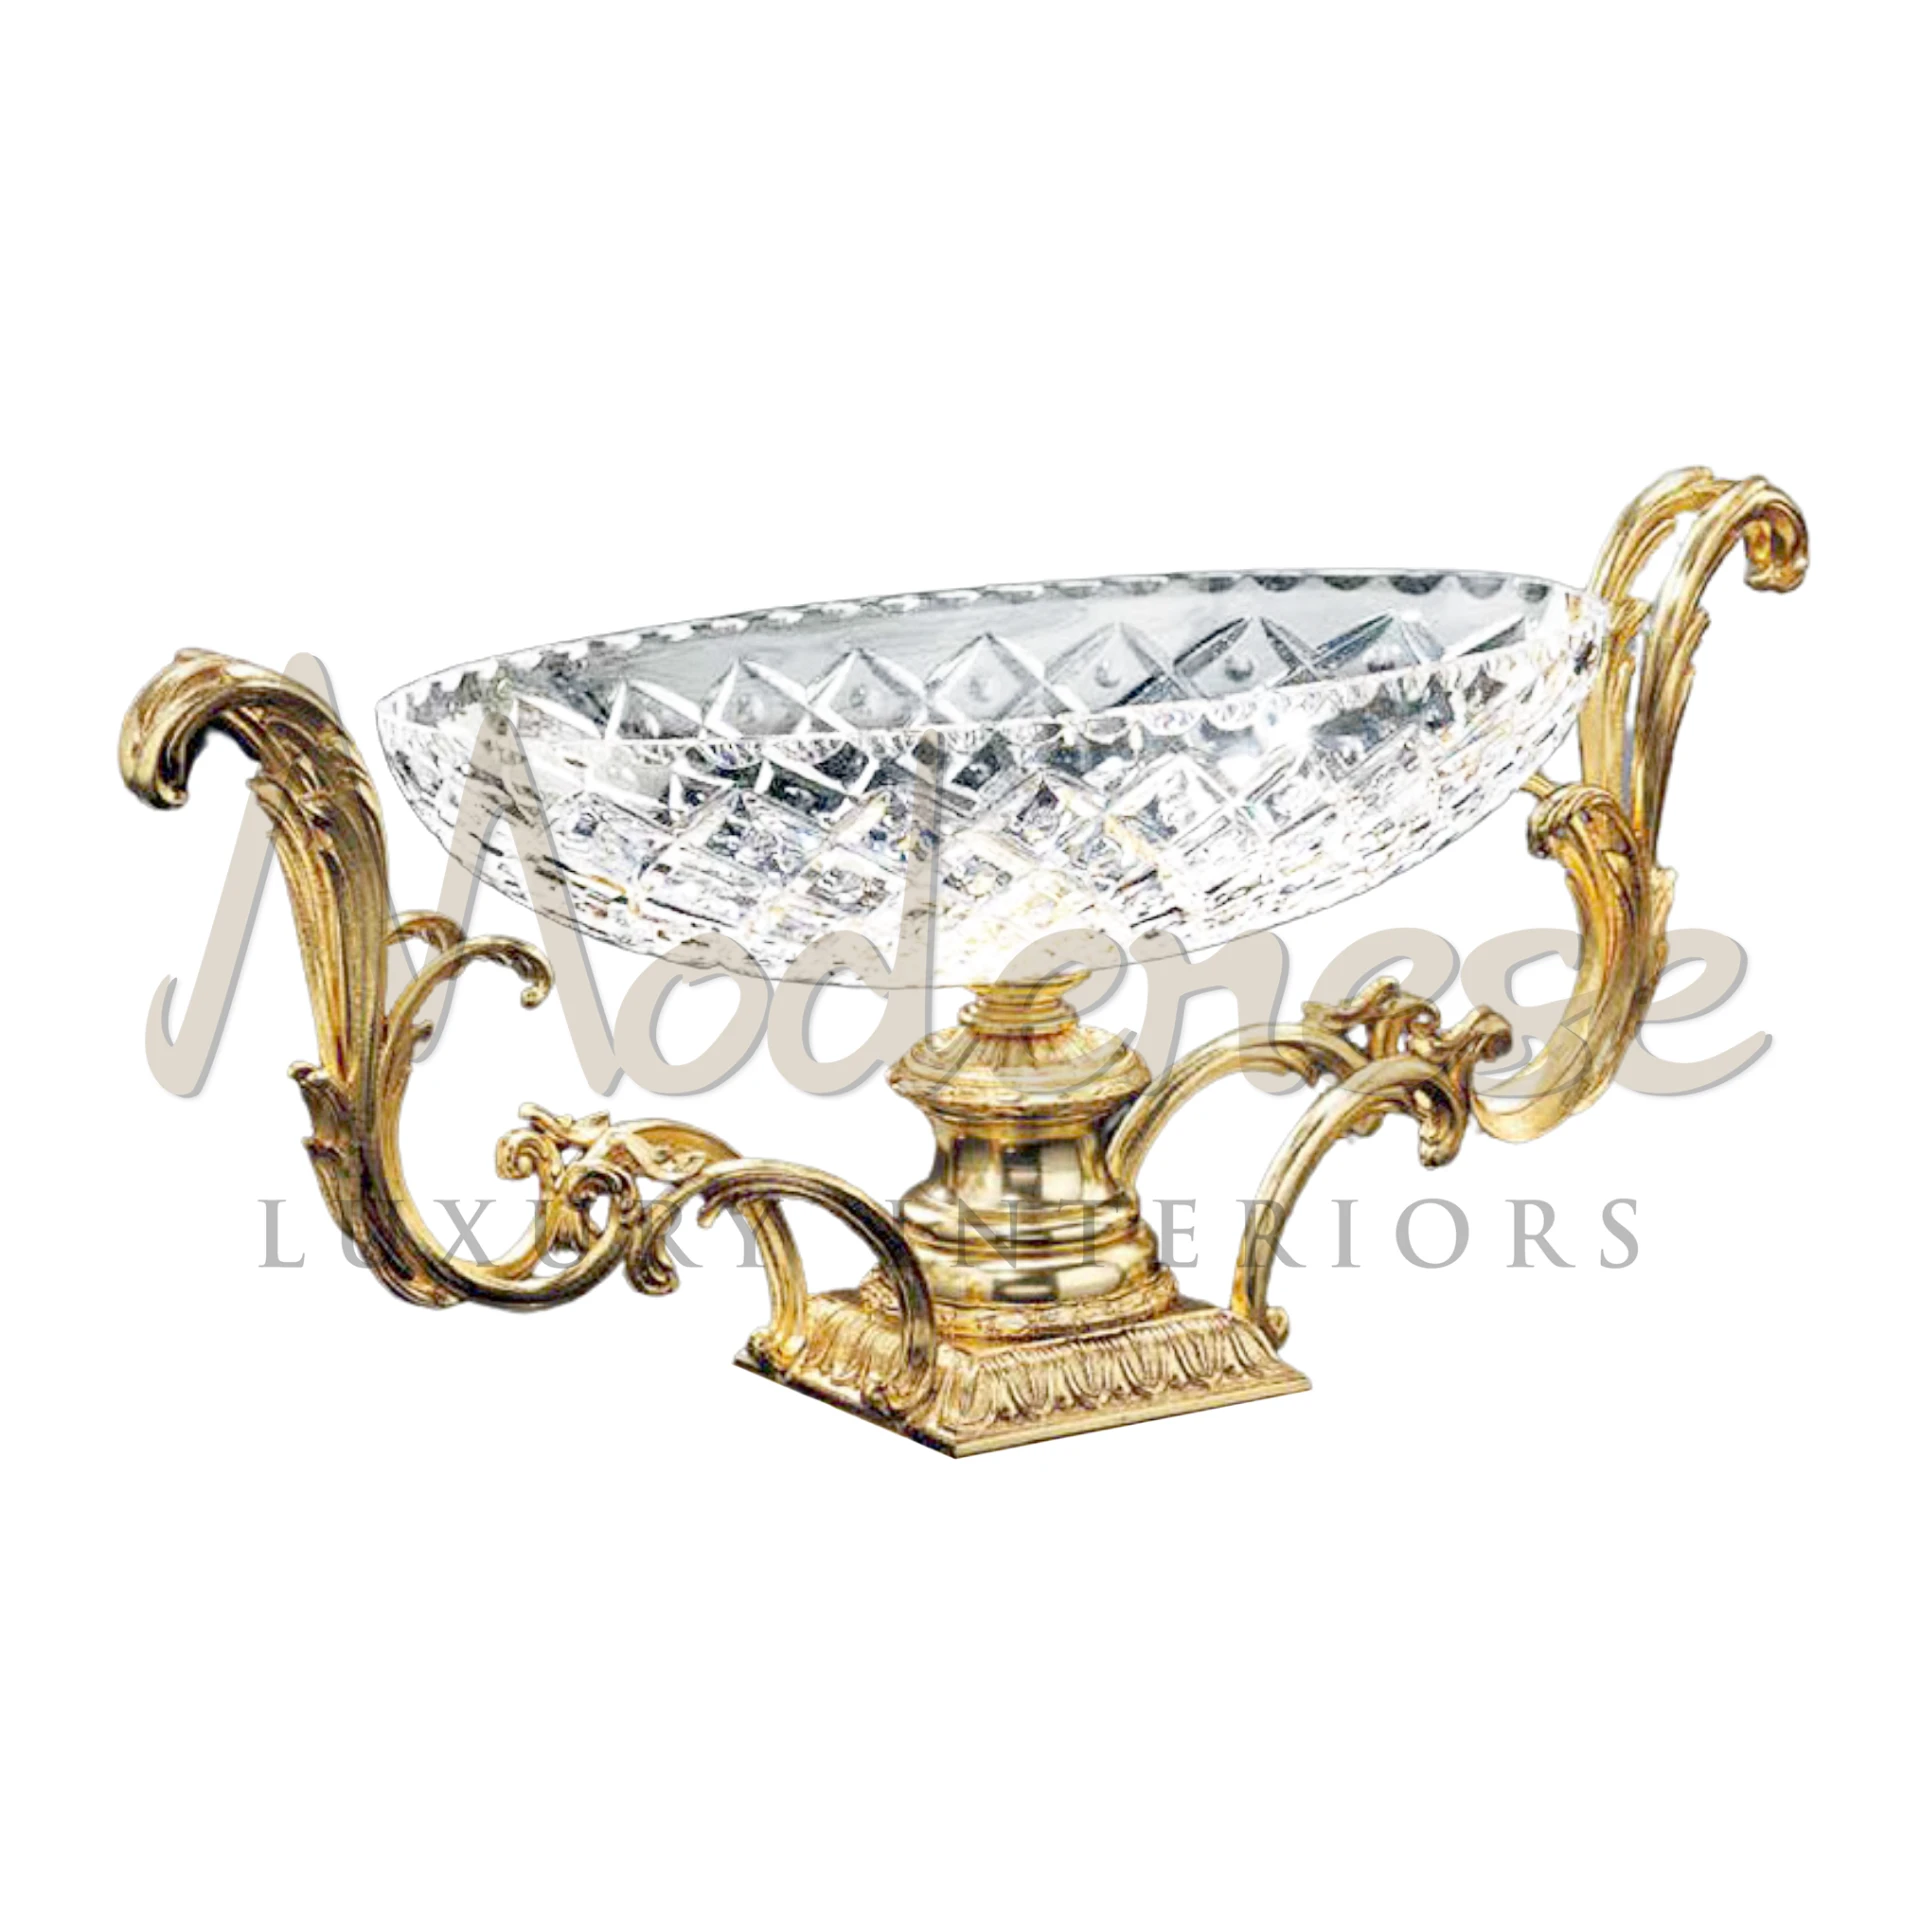 Elegant Gold Double Handled Bowl, versatile for decorative or functional use, adding sophistication and luxury to any setting.